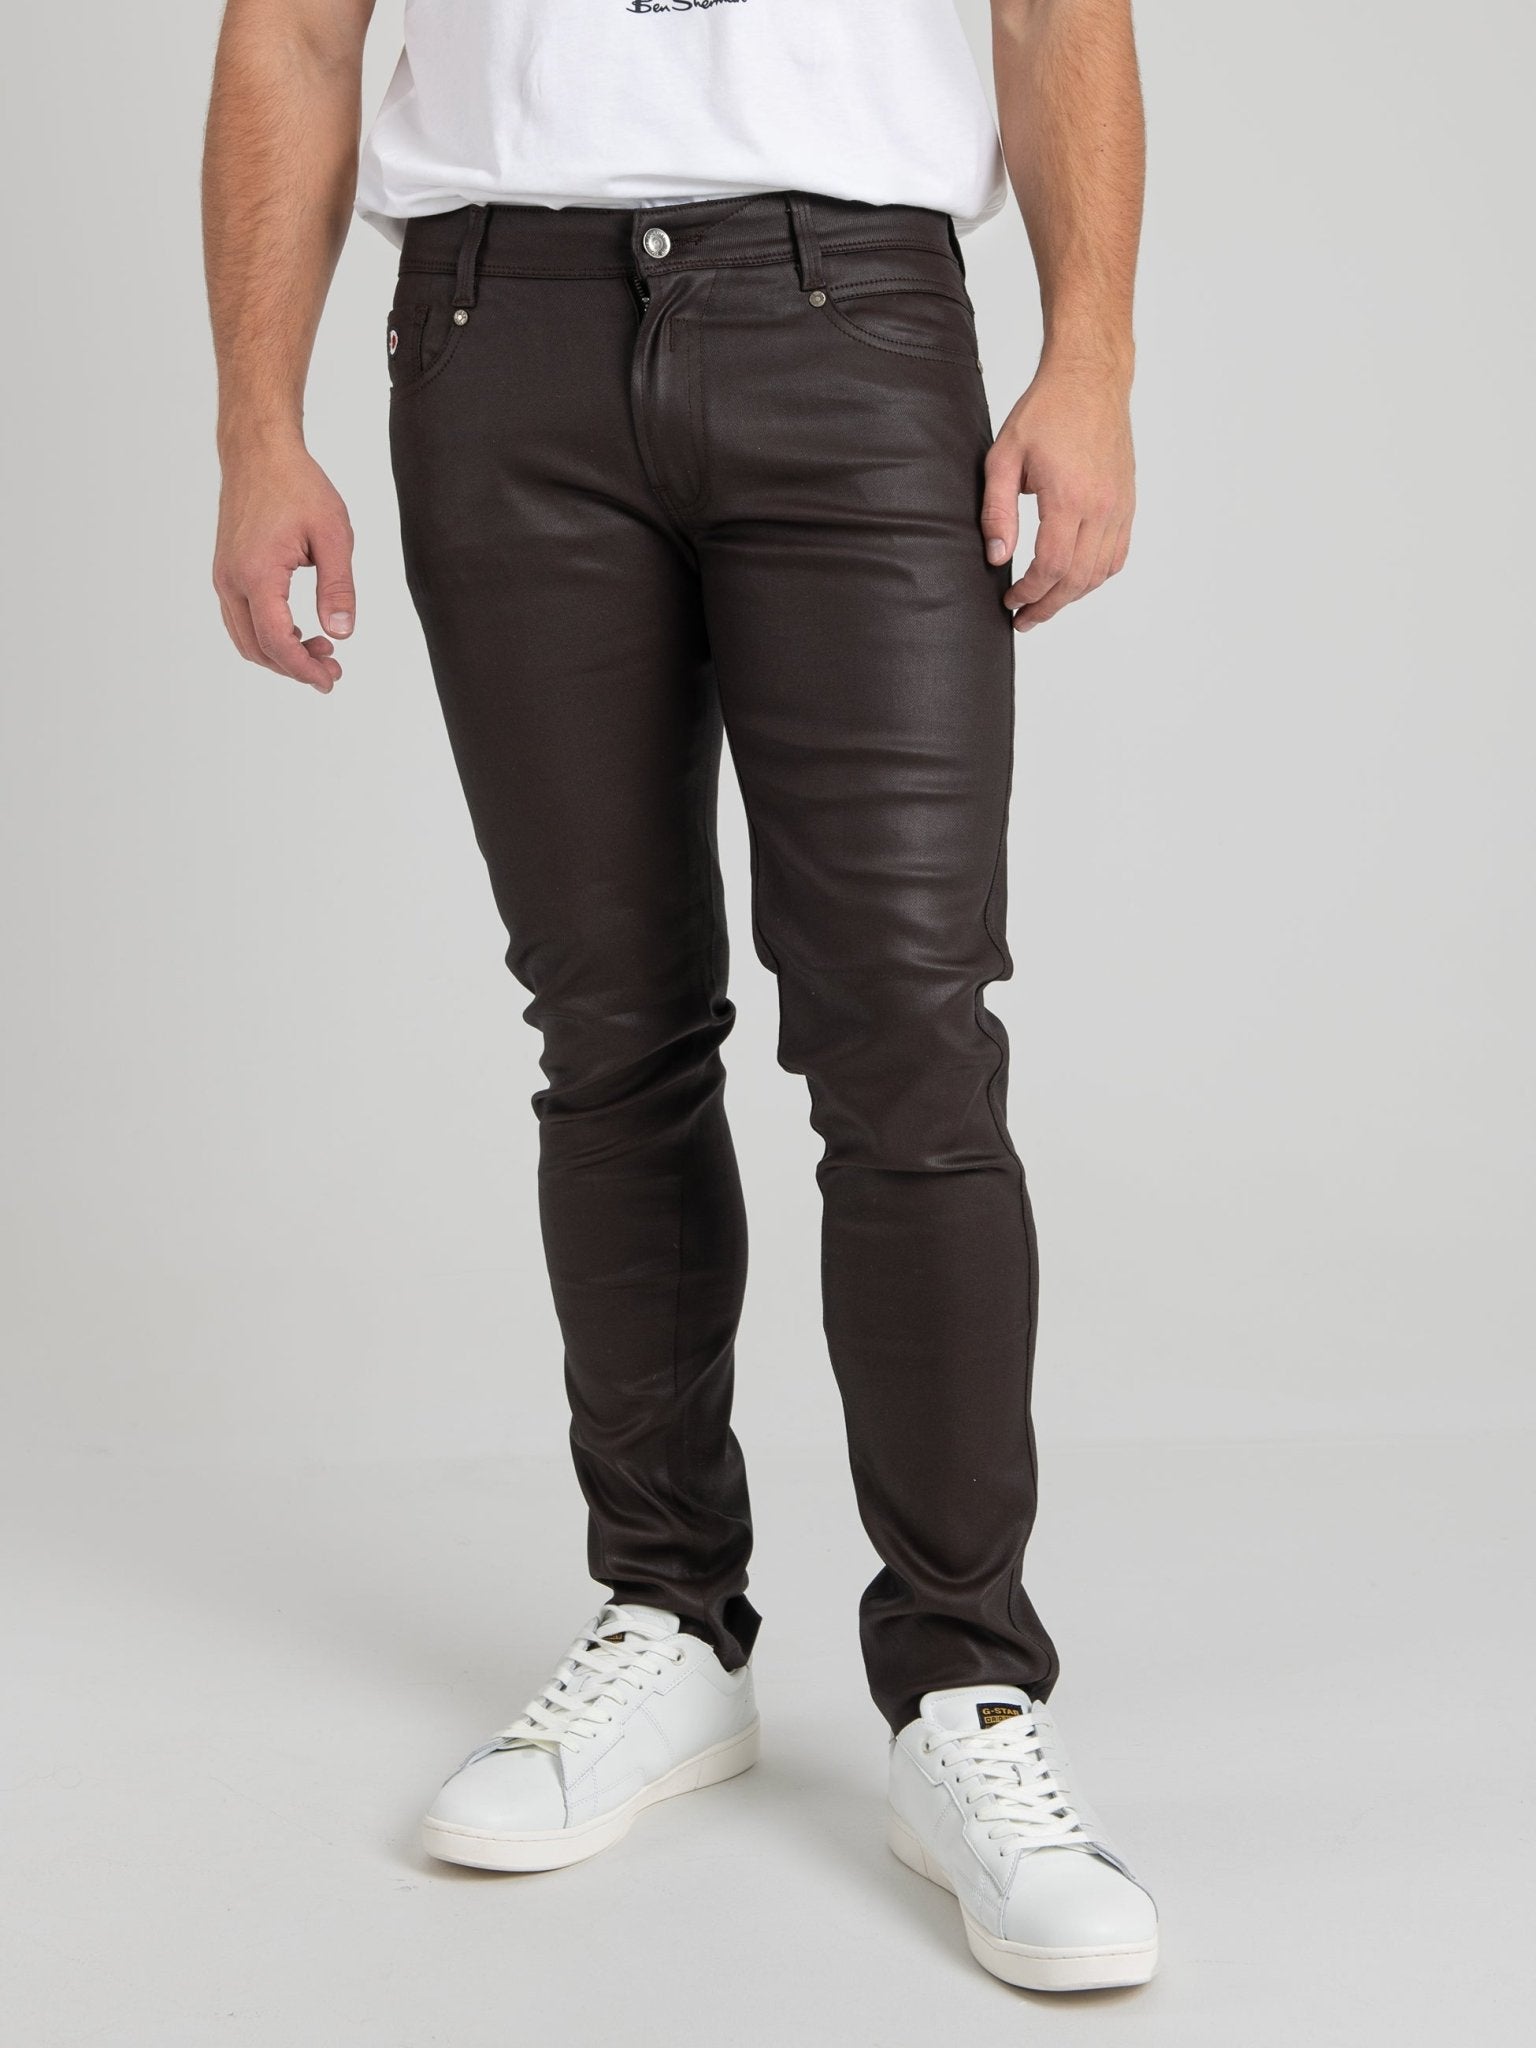 Wax Leather Coated Denim - Chocolate Brown - Ben Sherman South Africa